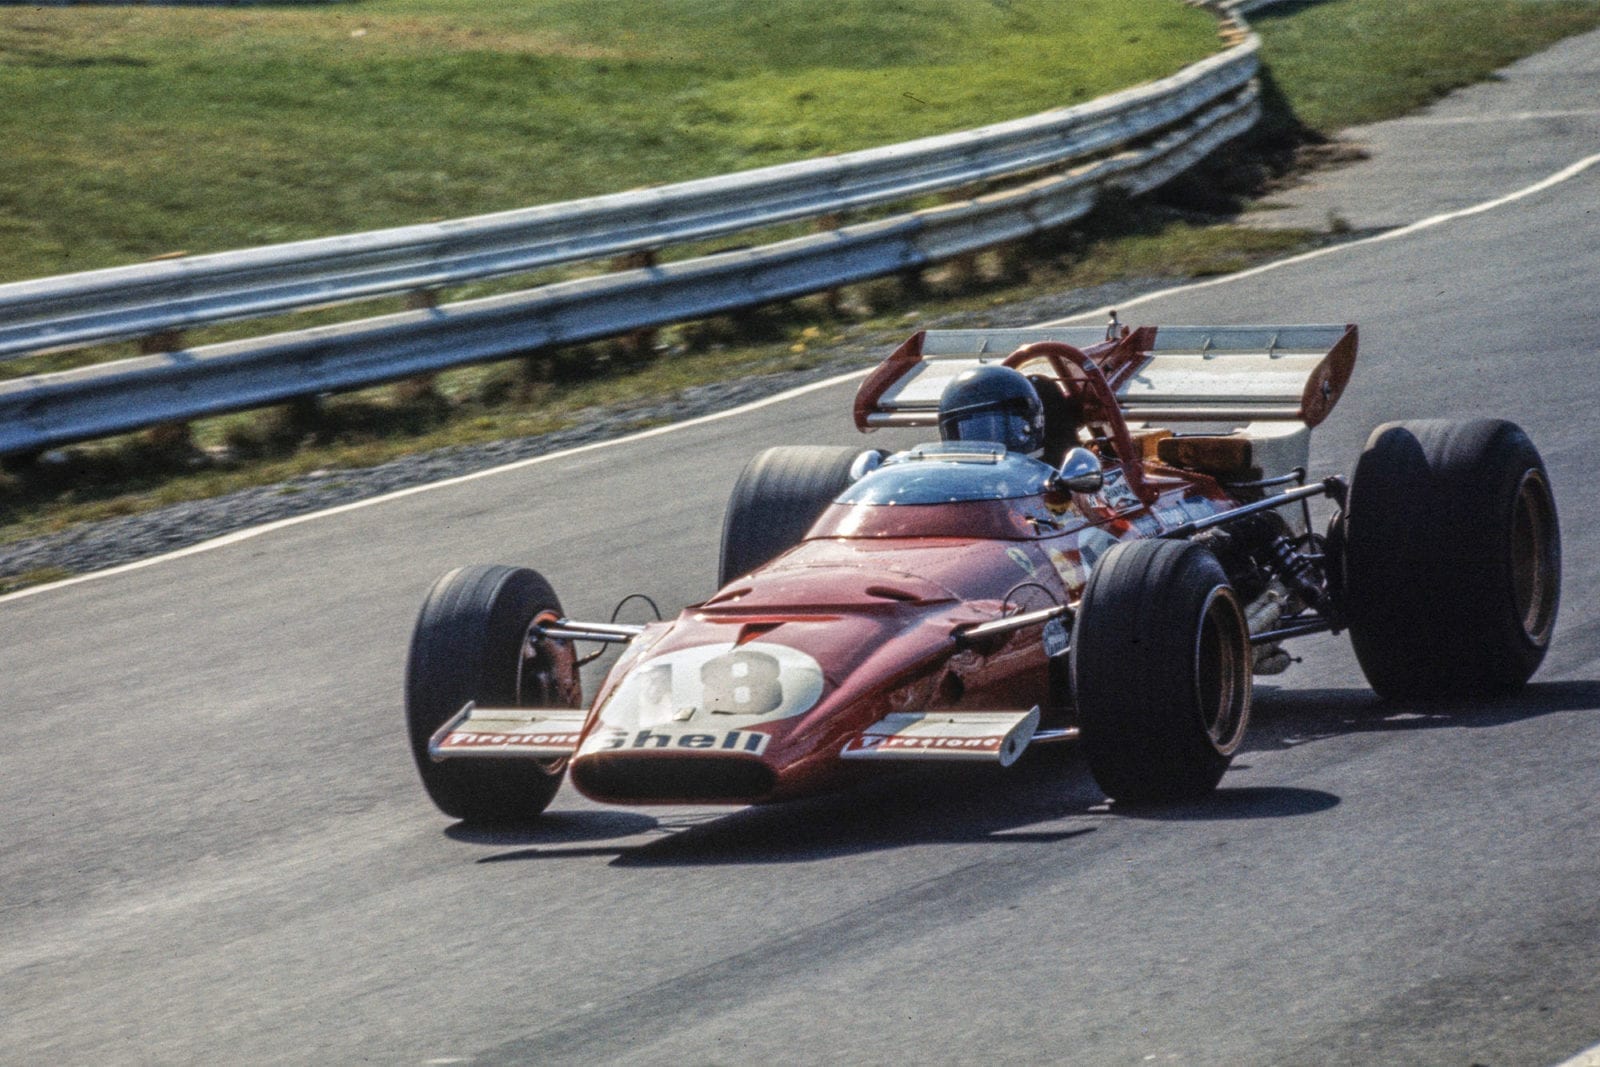 Jacky Ickx driving for Ferrari at the 1970 Canadian Grand Prix.